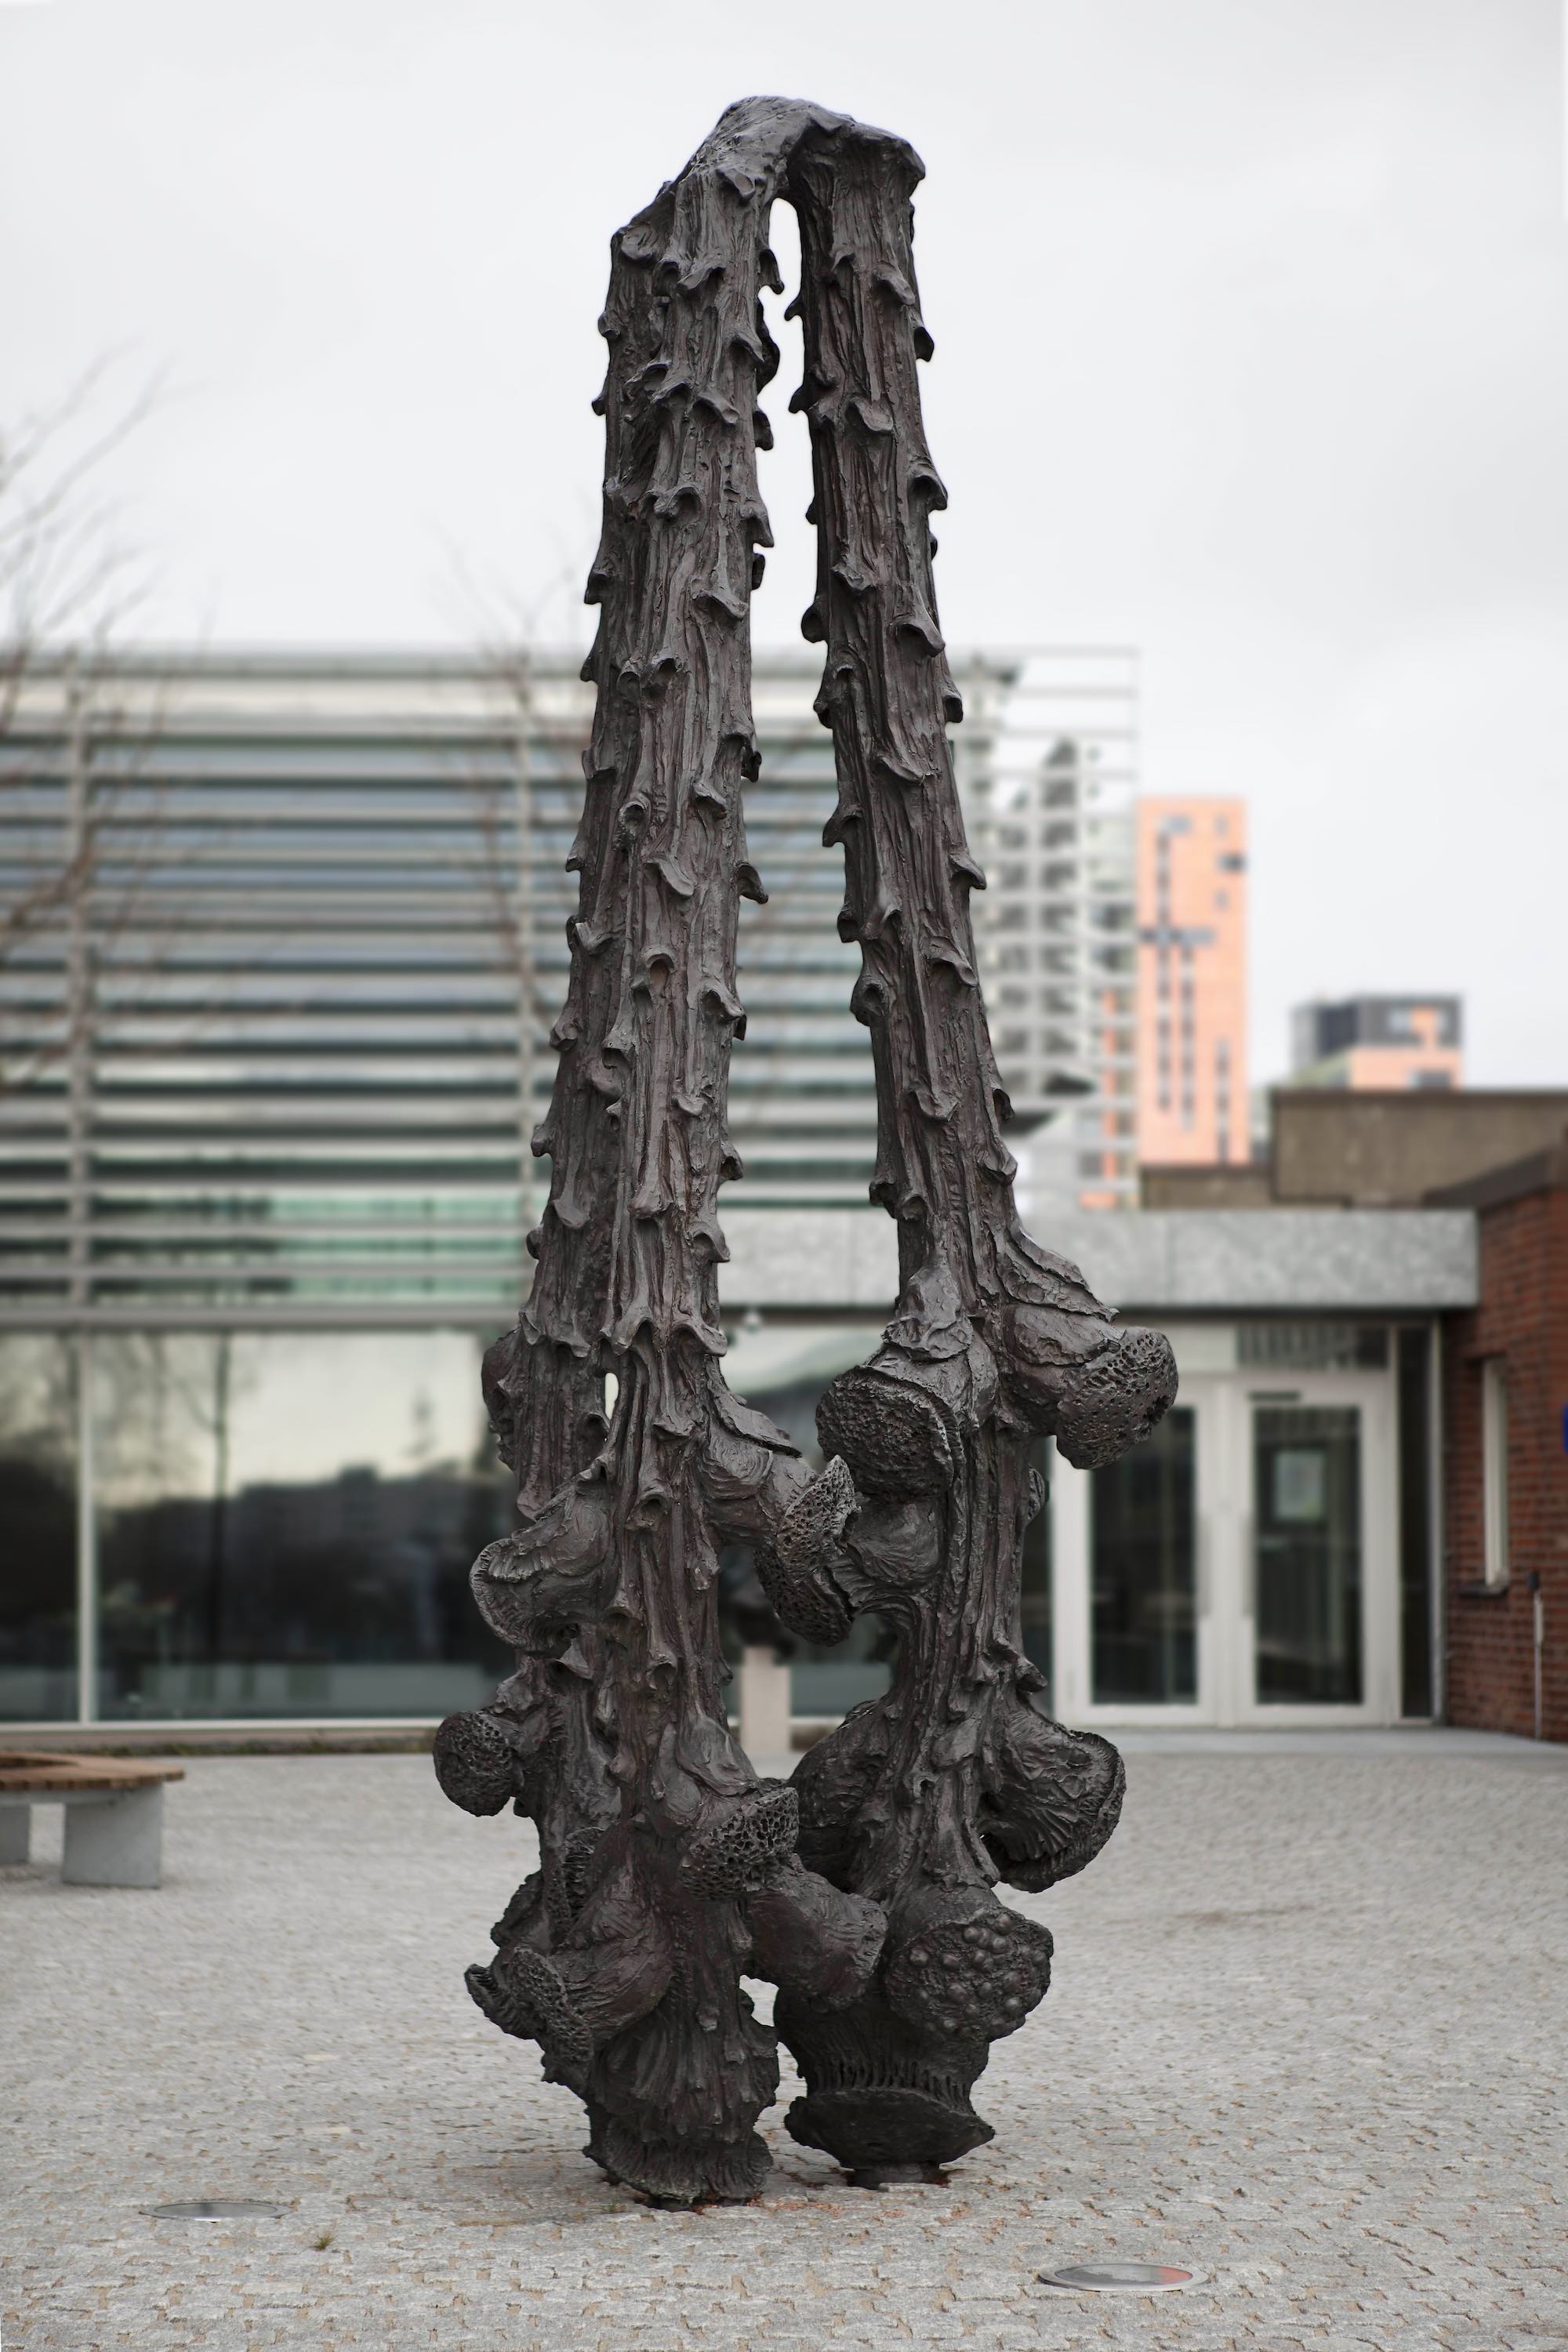 Carl Boutard, Into the Wild, 2013, bronze, 400 x 150 x 150 cm, commissioned by Public Art Agency Sweden for the department of Architecture at Lund University. Three Christmas tree branches turned upside down, then enlarged manually at forty times magnification. 